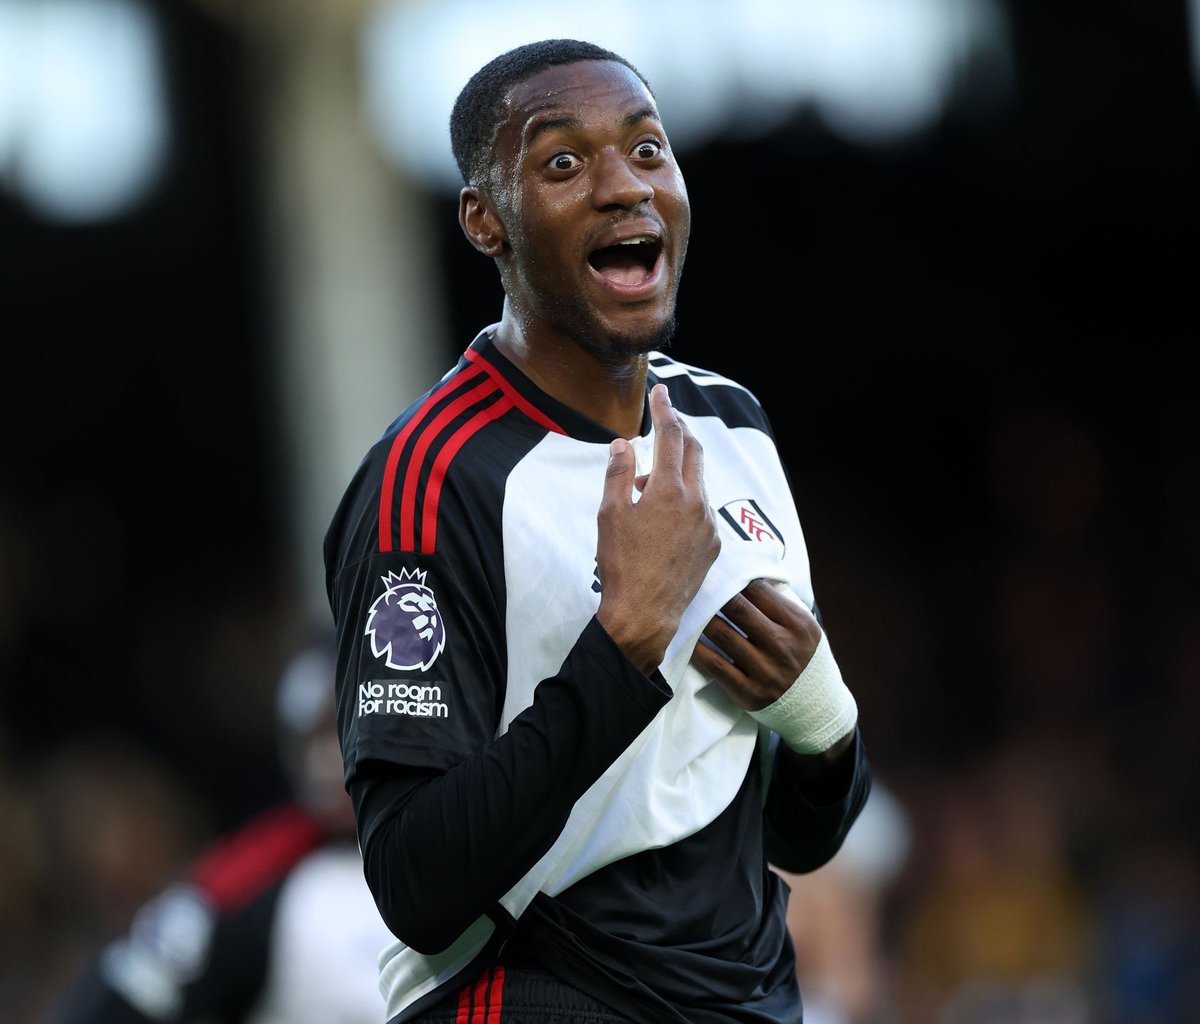 🚨🏴󠁧󠁢󠁥󠁮󠁧󠁿 𝐉𝐔𝐒𝐓 𝐈𝐍! Manchester United are pushing to sign Tosin Adarabioyo on a free transfer. #MUFC [@SamC_reports]